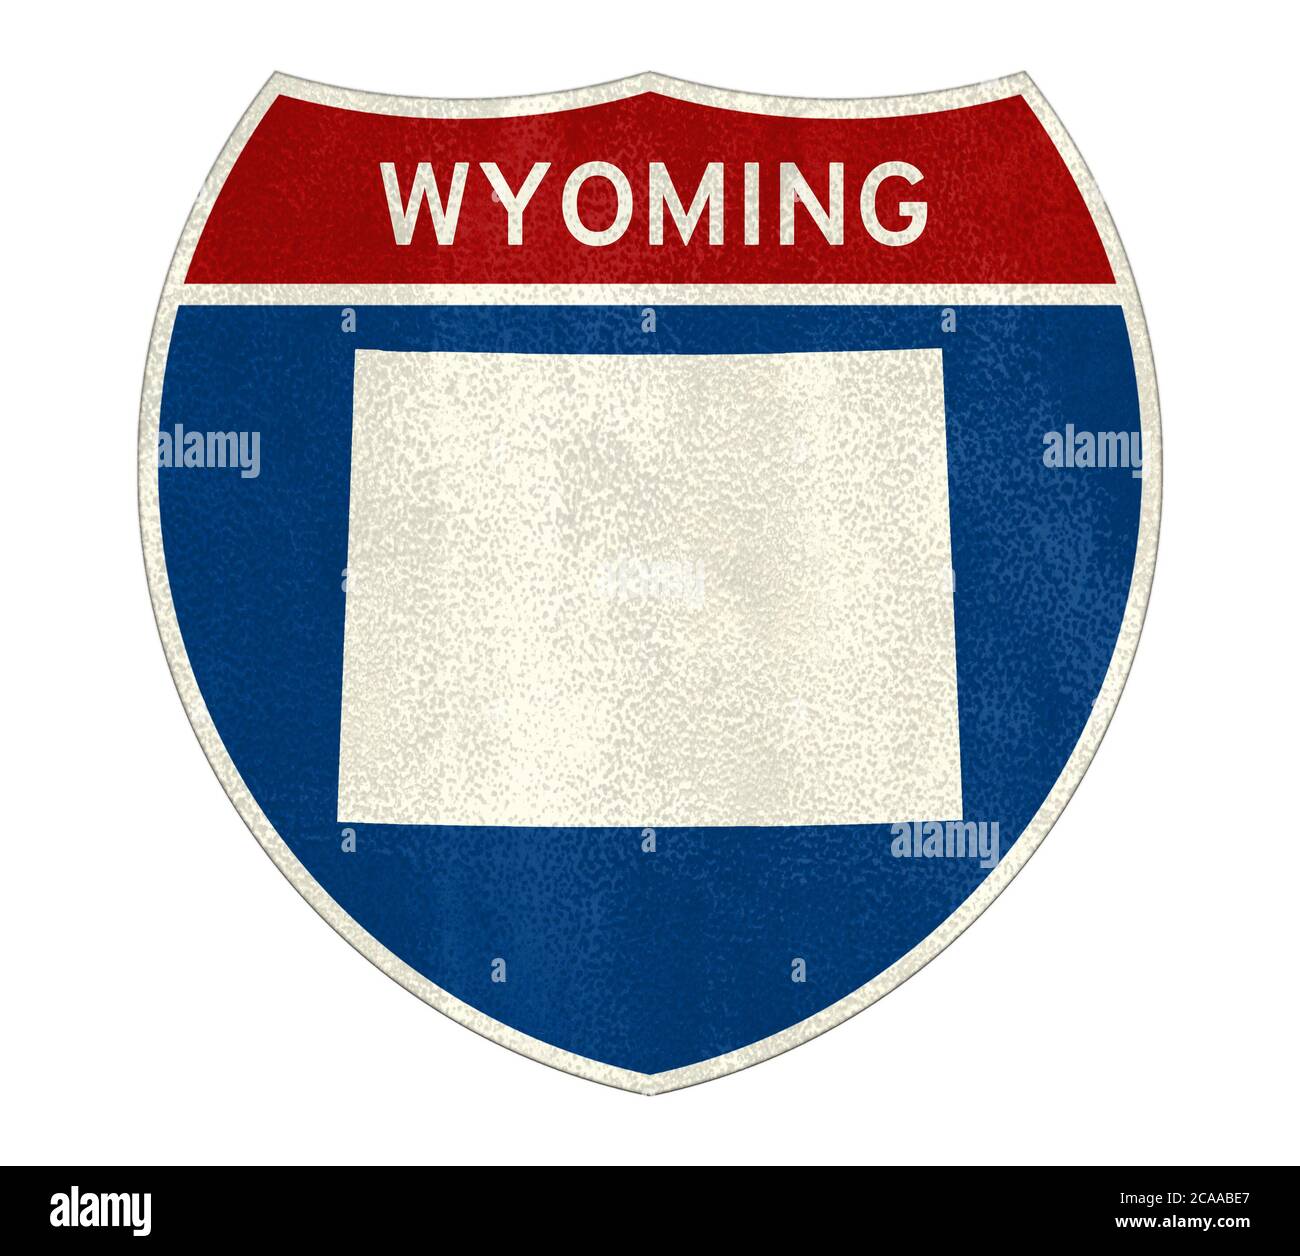 Wyoming State Interstate road sign Stock Photo